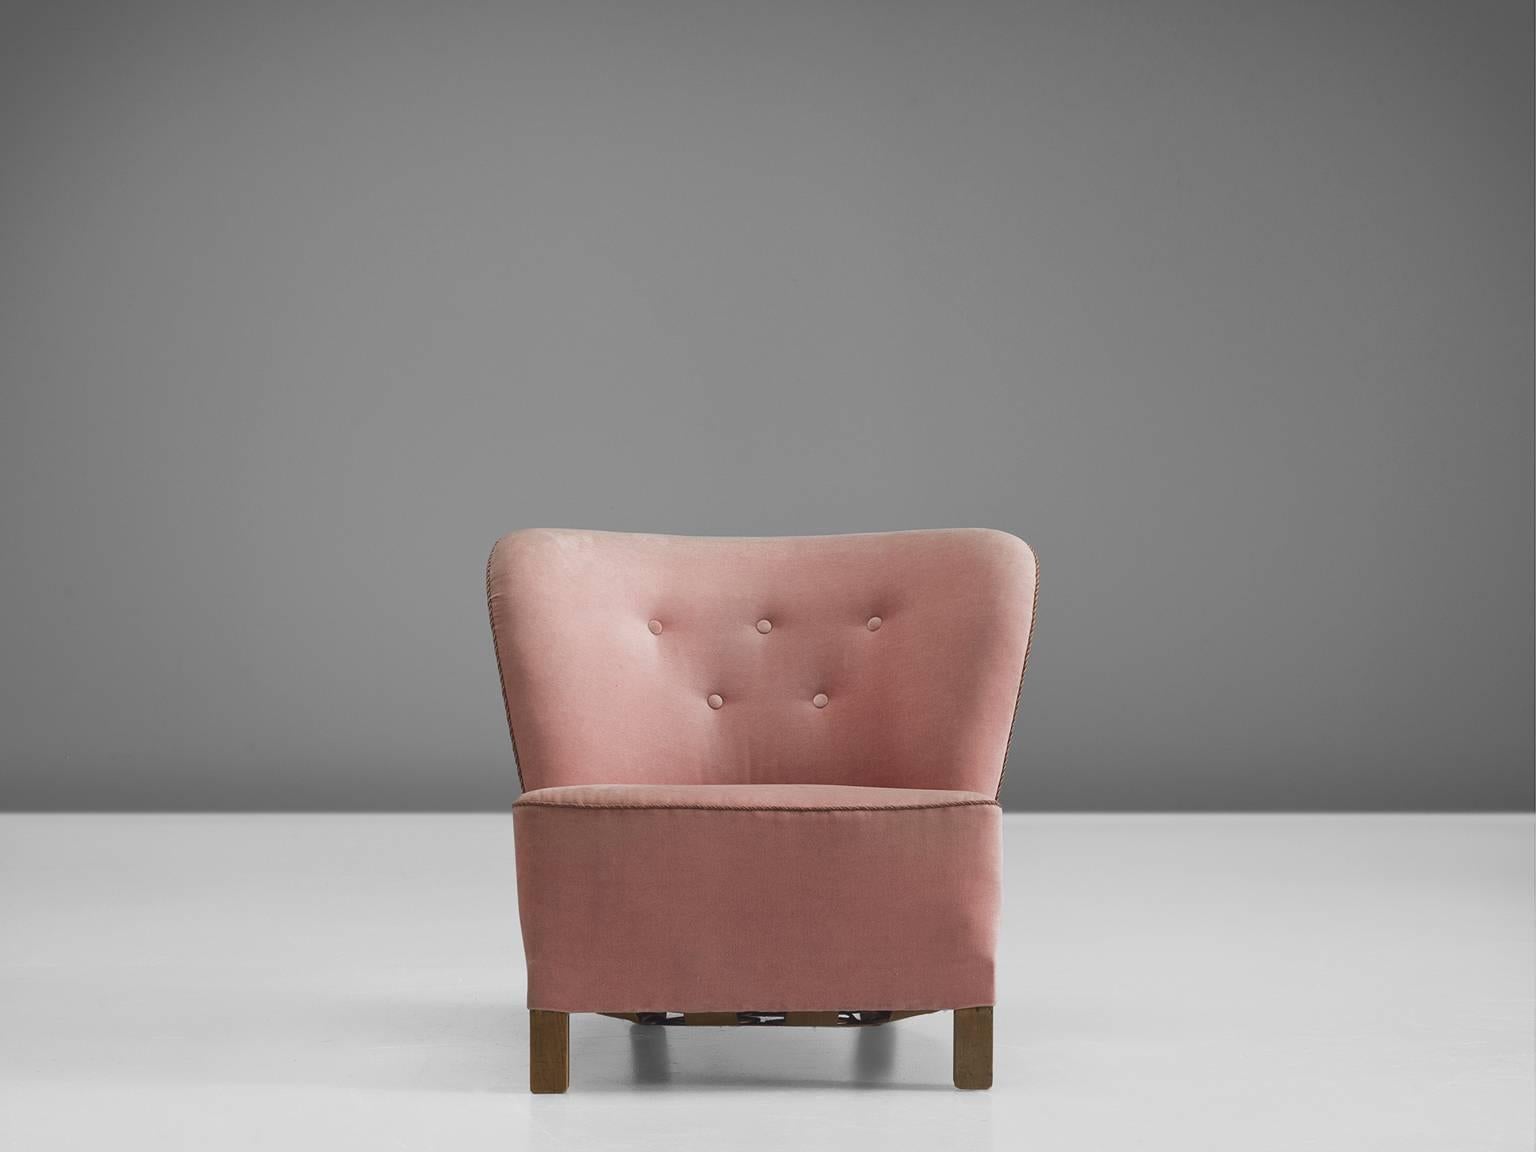 Lounge chair by Otto Færge, pink fabric, wooden legs, Denmark, 1940s

This elegant, curved settee features two quilted lines in the chair's back. The backrest flows slightly outwards when seen from the seat which is the reason that this chair has